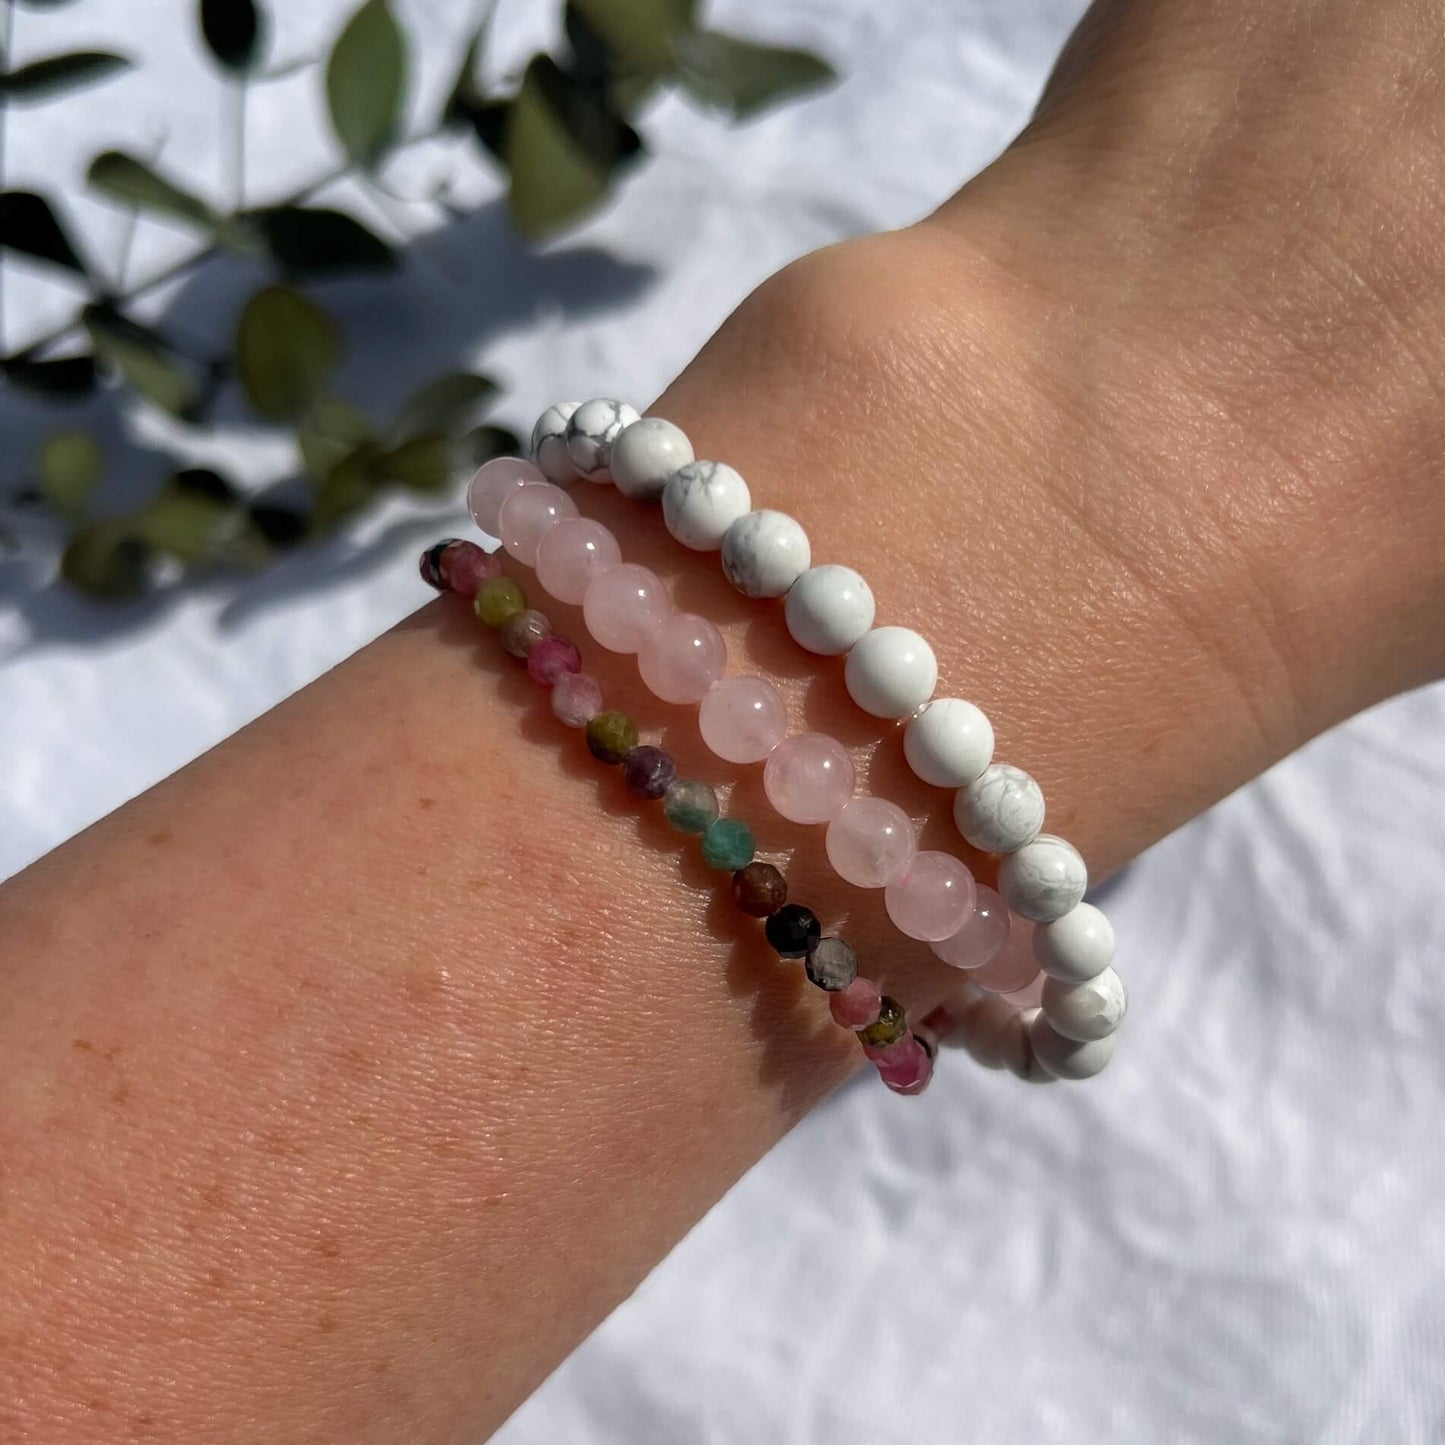 Three healing crystal bead bracelets for self love & calm in howlite, rose quartz and pink & green tourmaline